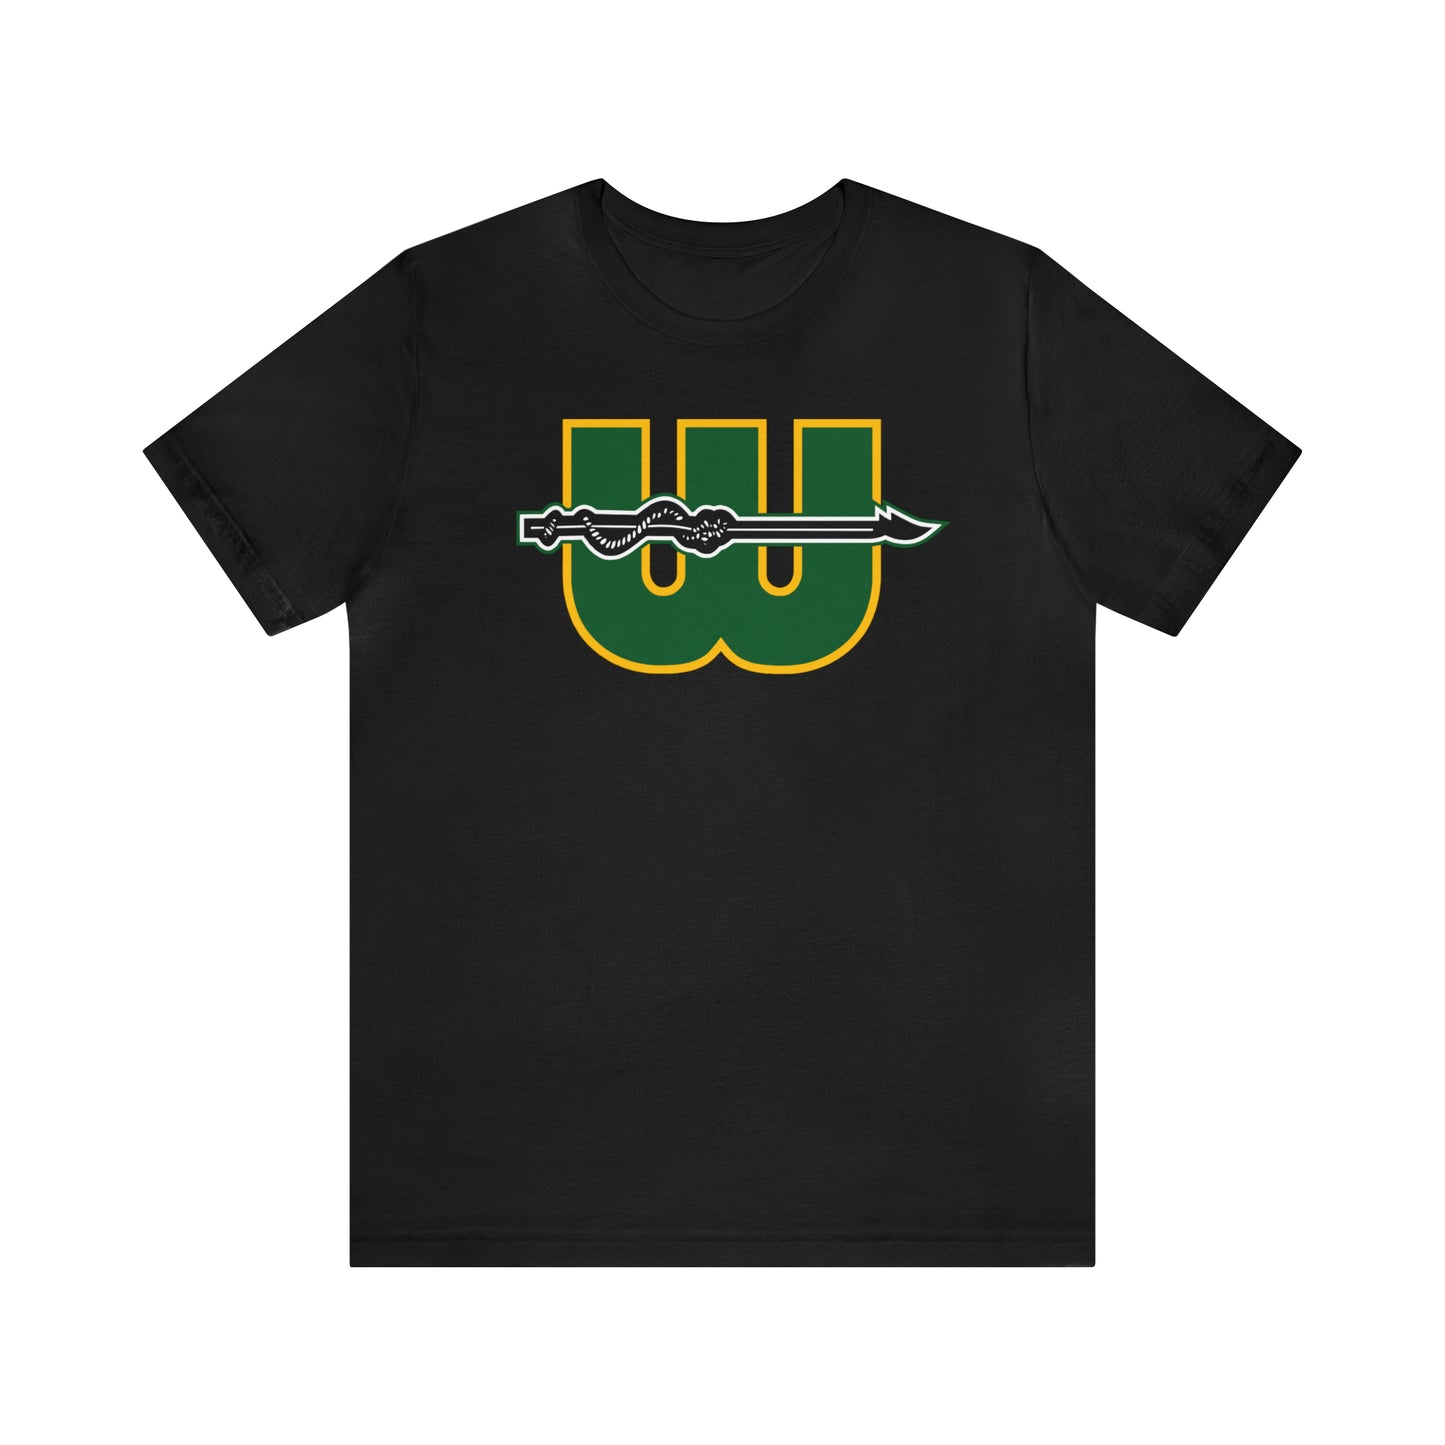 New England Whalers Shirt